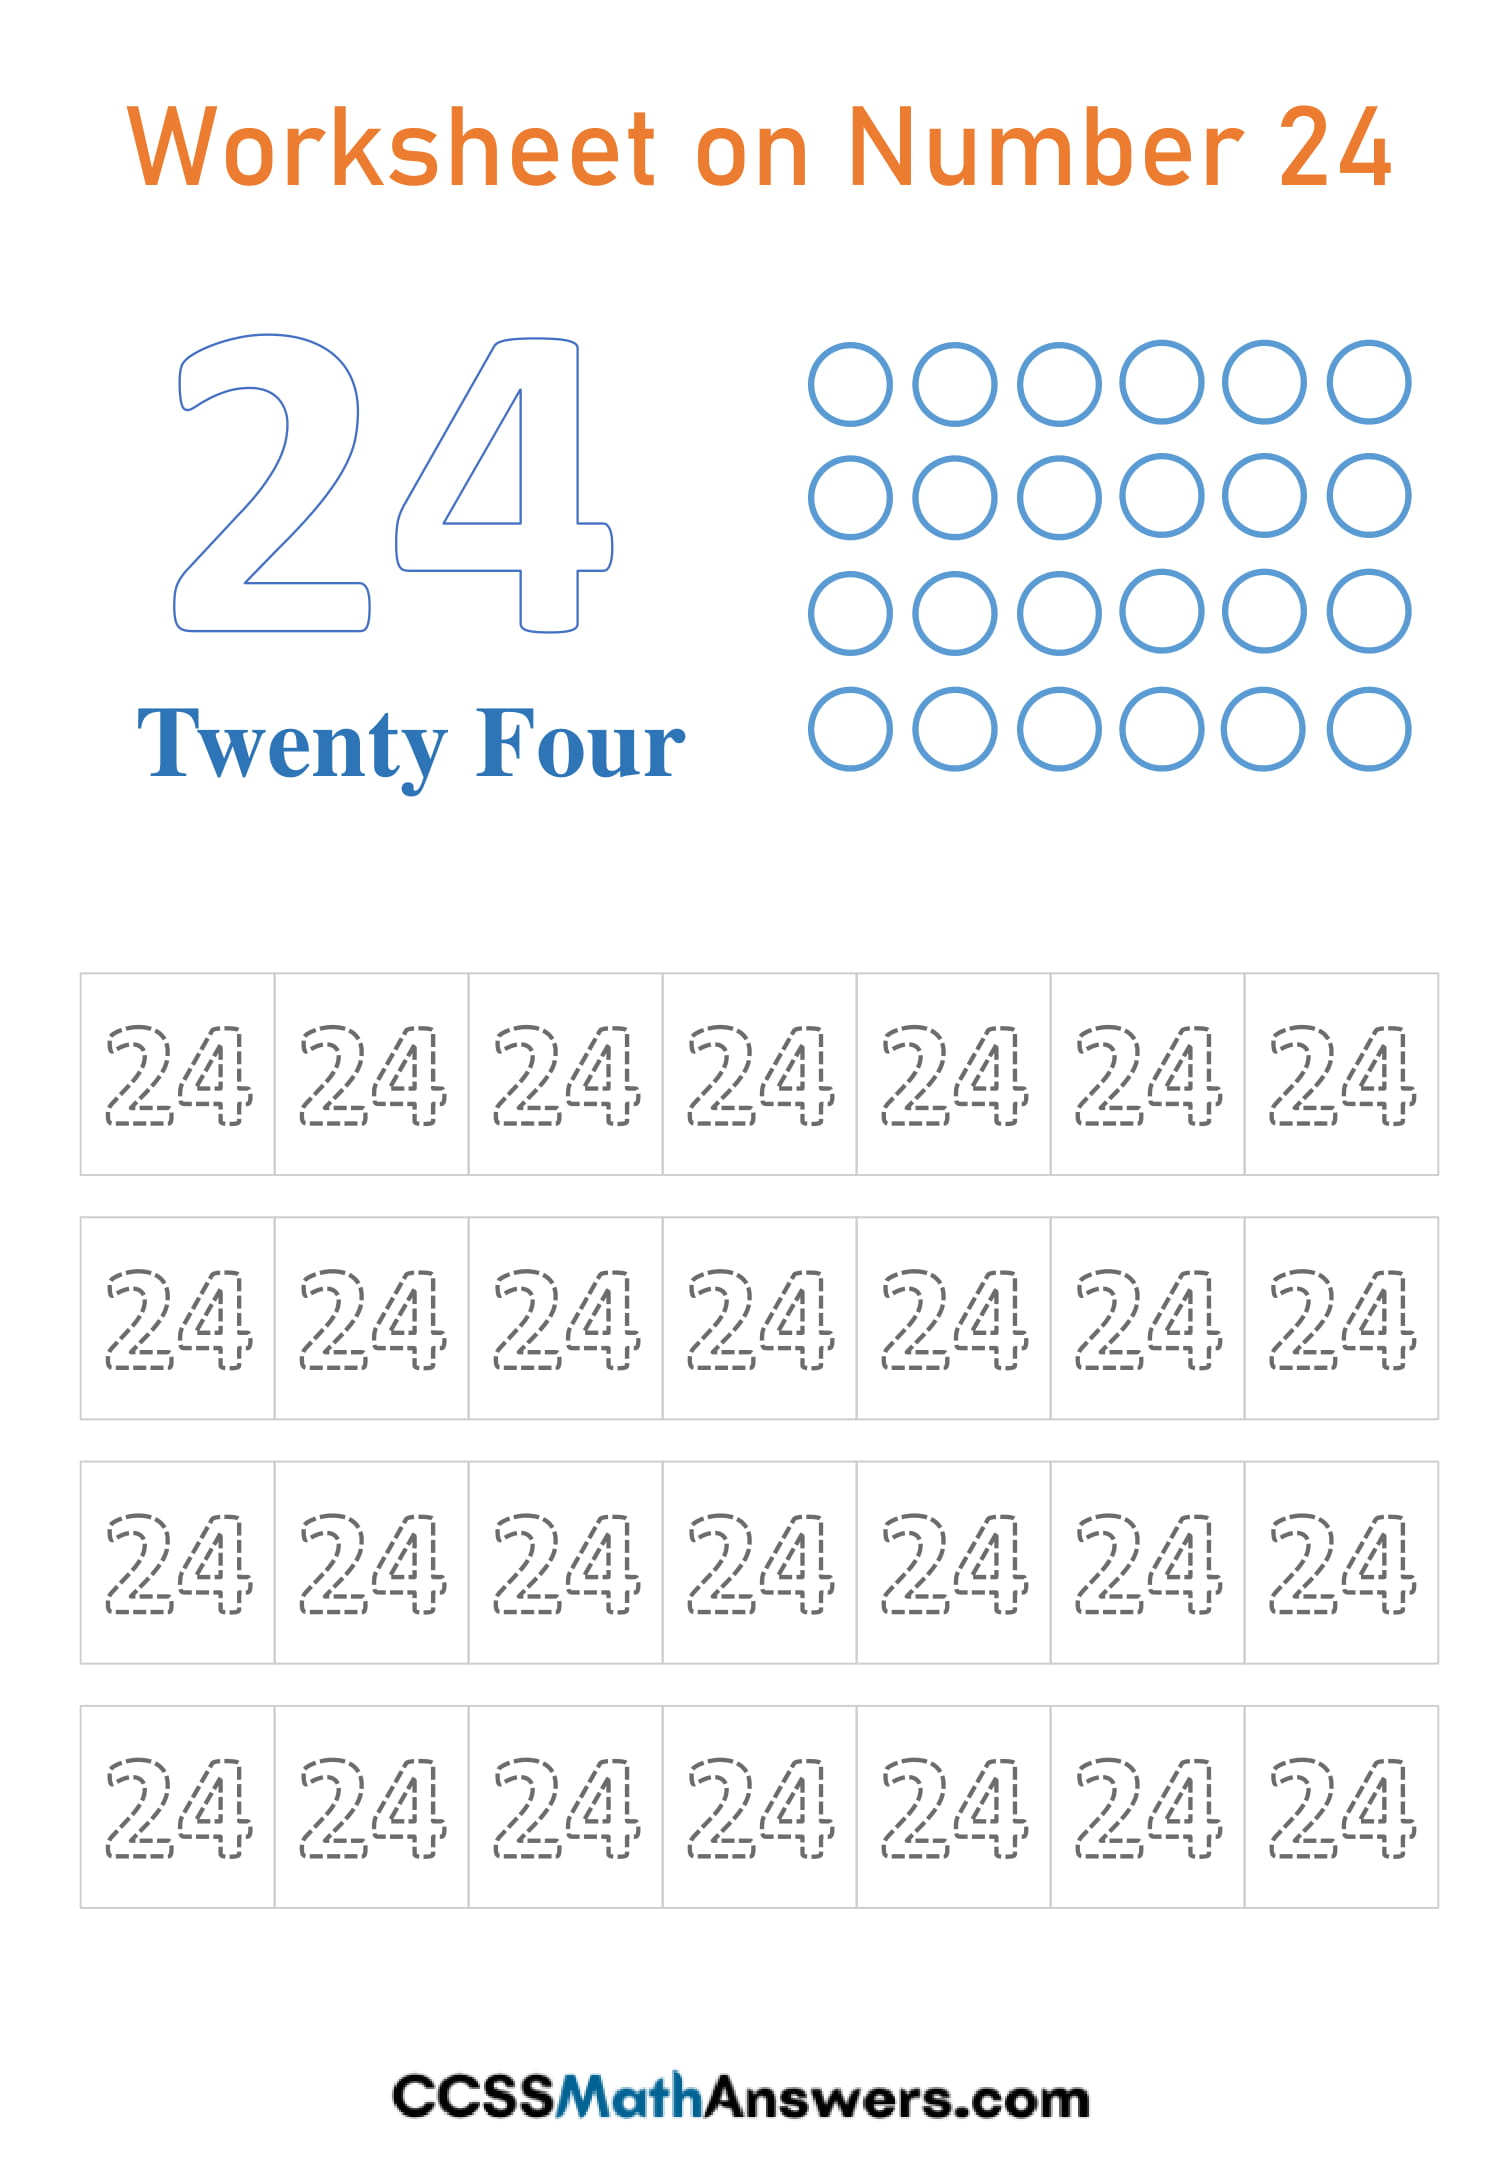 Worksheet On Number 24 For Kindergarten Free Printable Number 24 Tracing Counting Writing